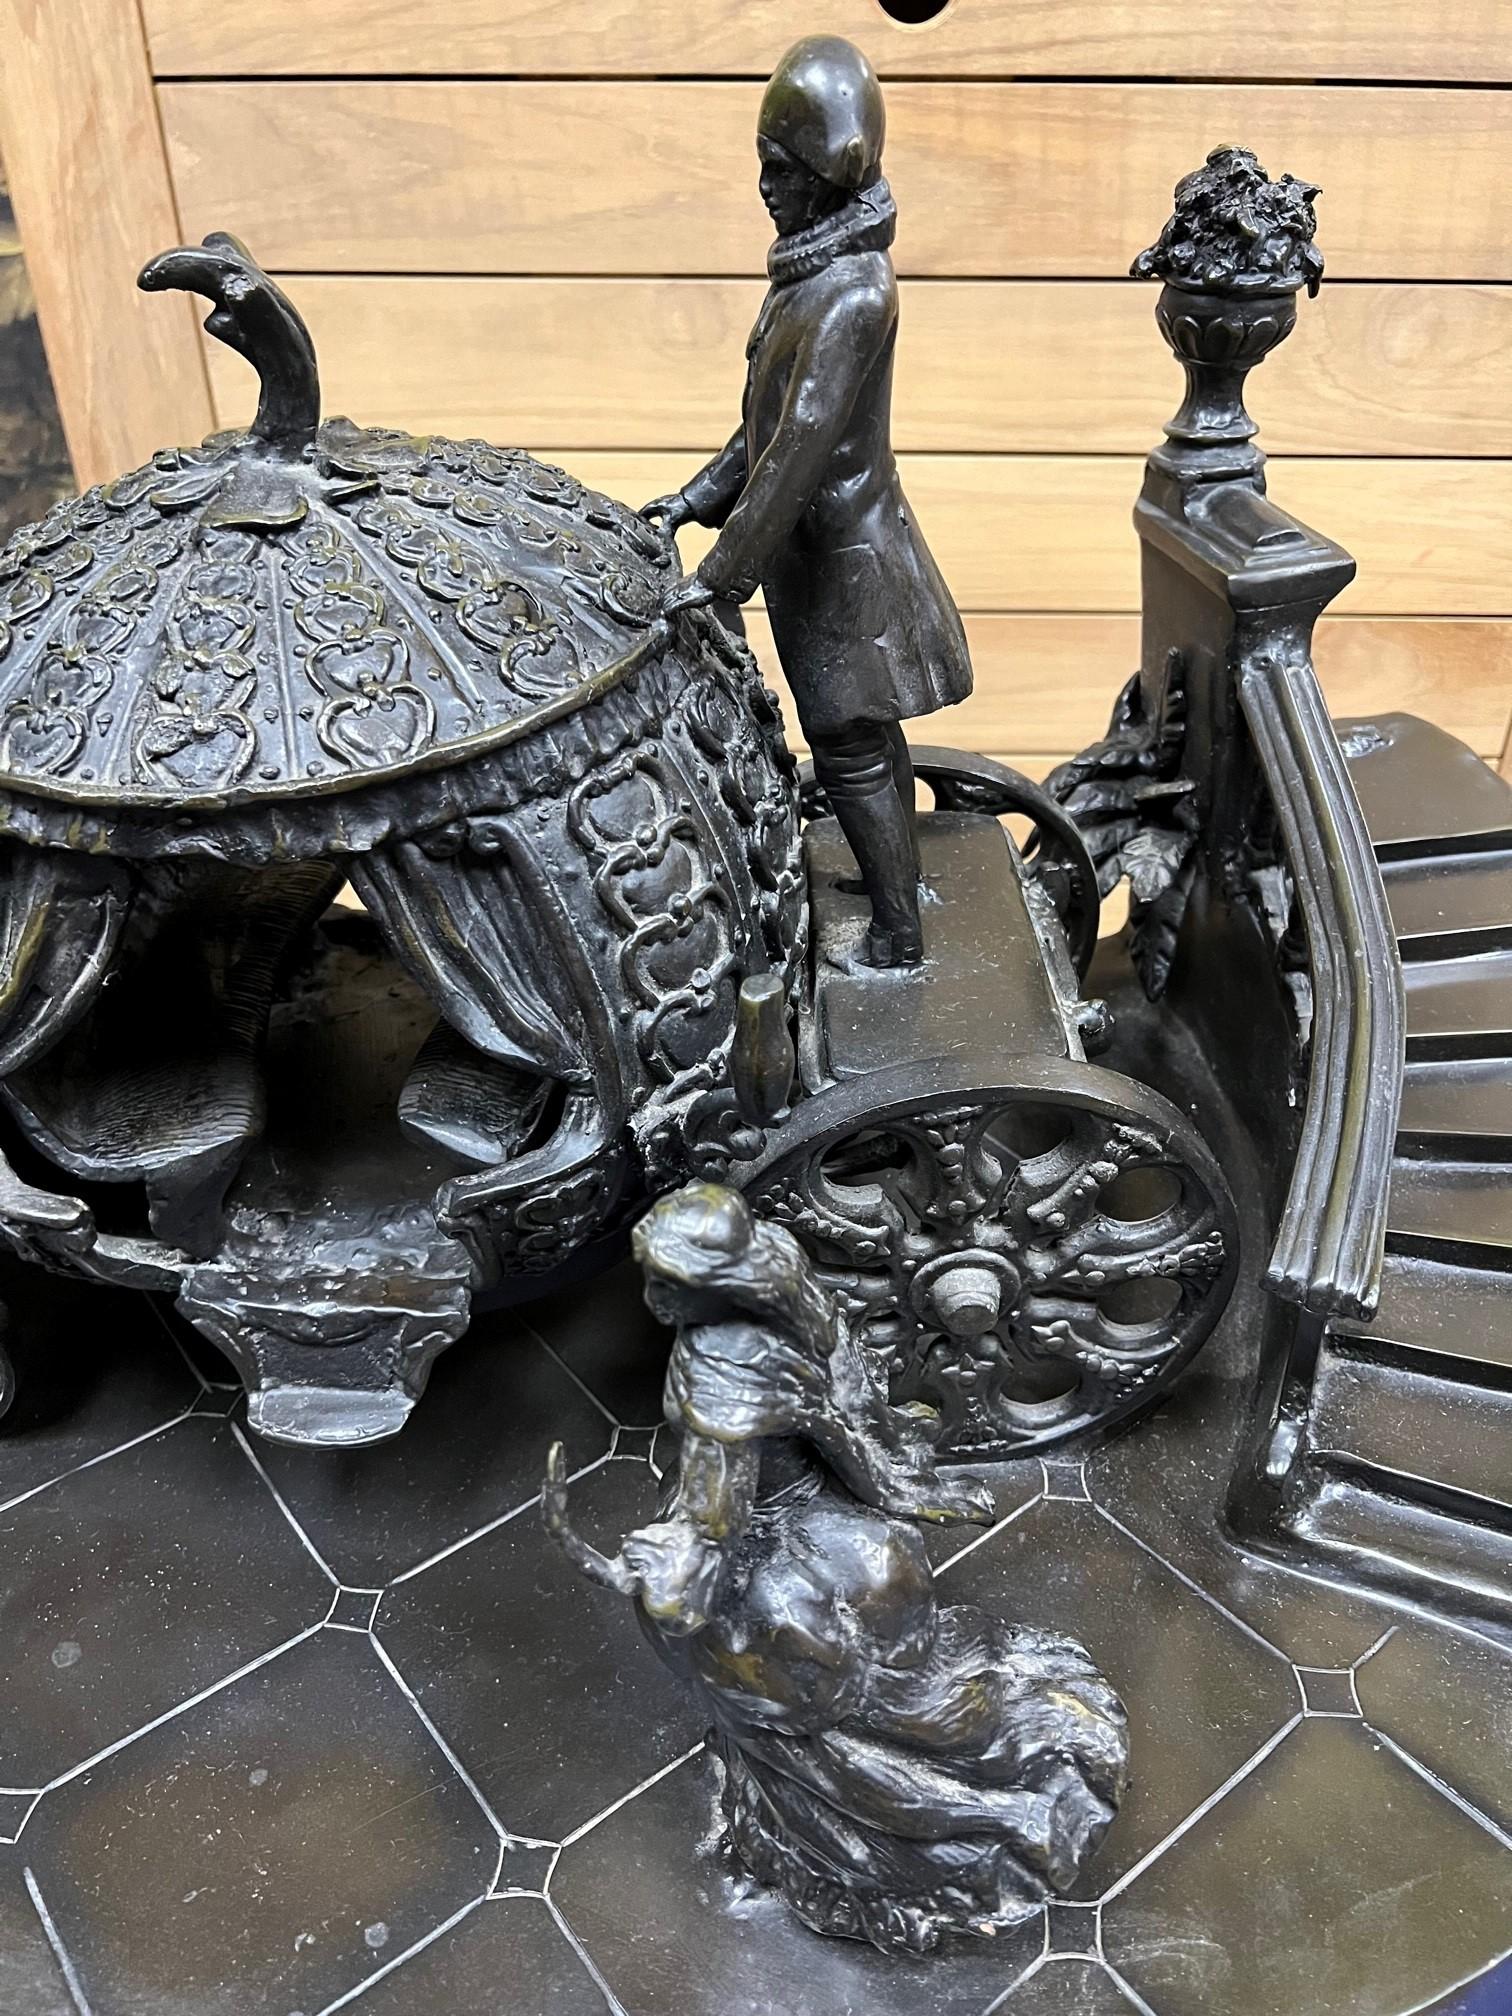 Impressive bronze sculpture of Cinderella's famous midnight run to the pumpkin carriage. Cinderella is running down the staircase losing her glass slipper on her way to the pumpkin carriage before the midnight deadline. This is a great bronze